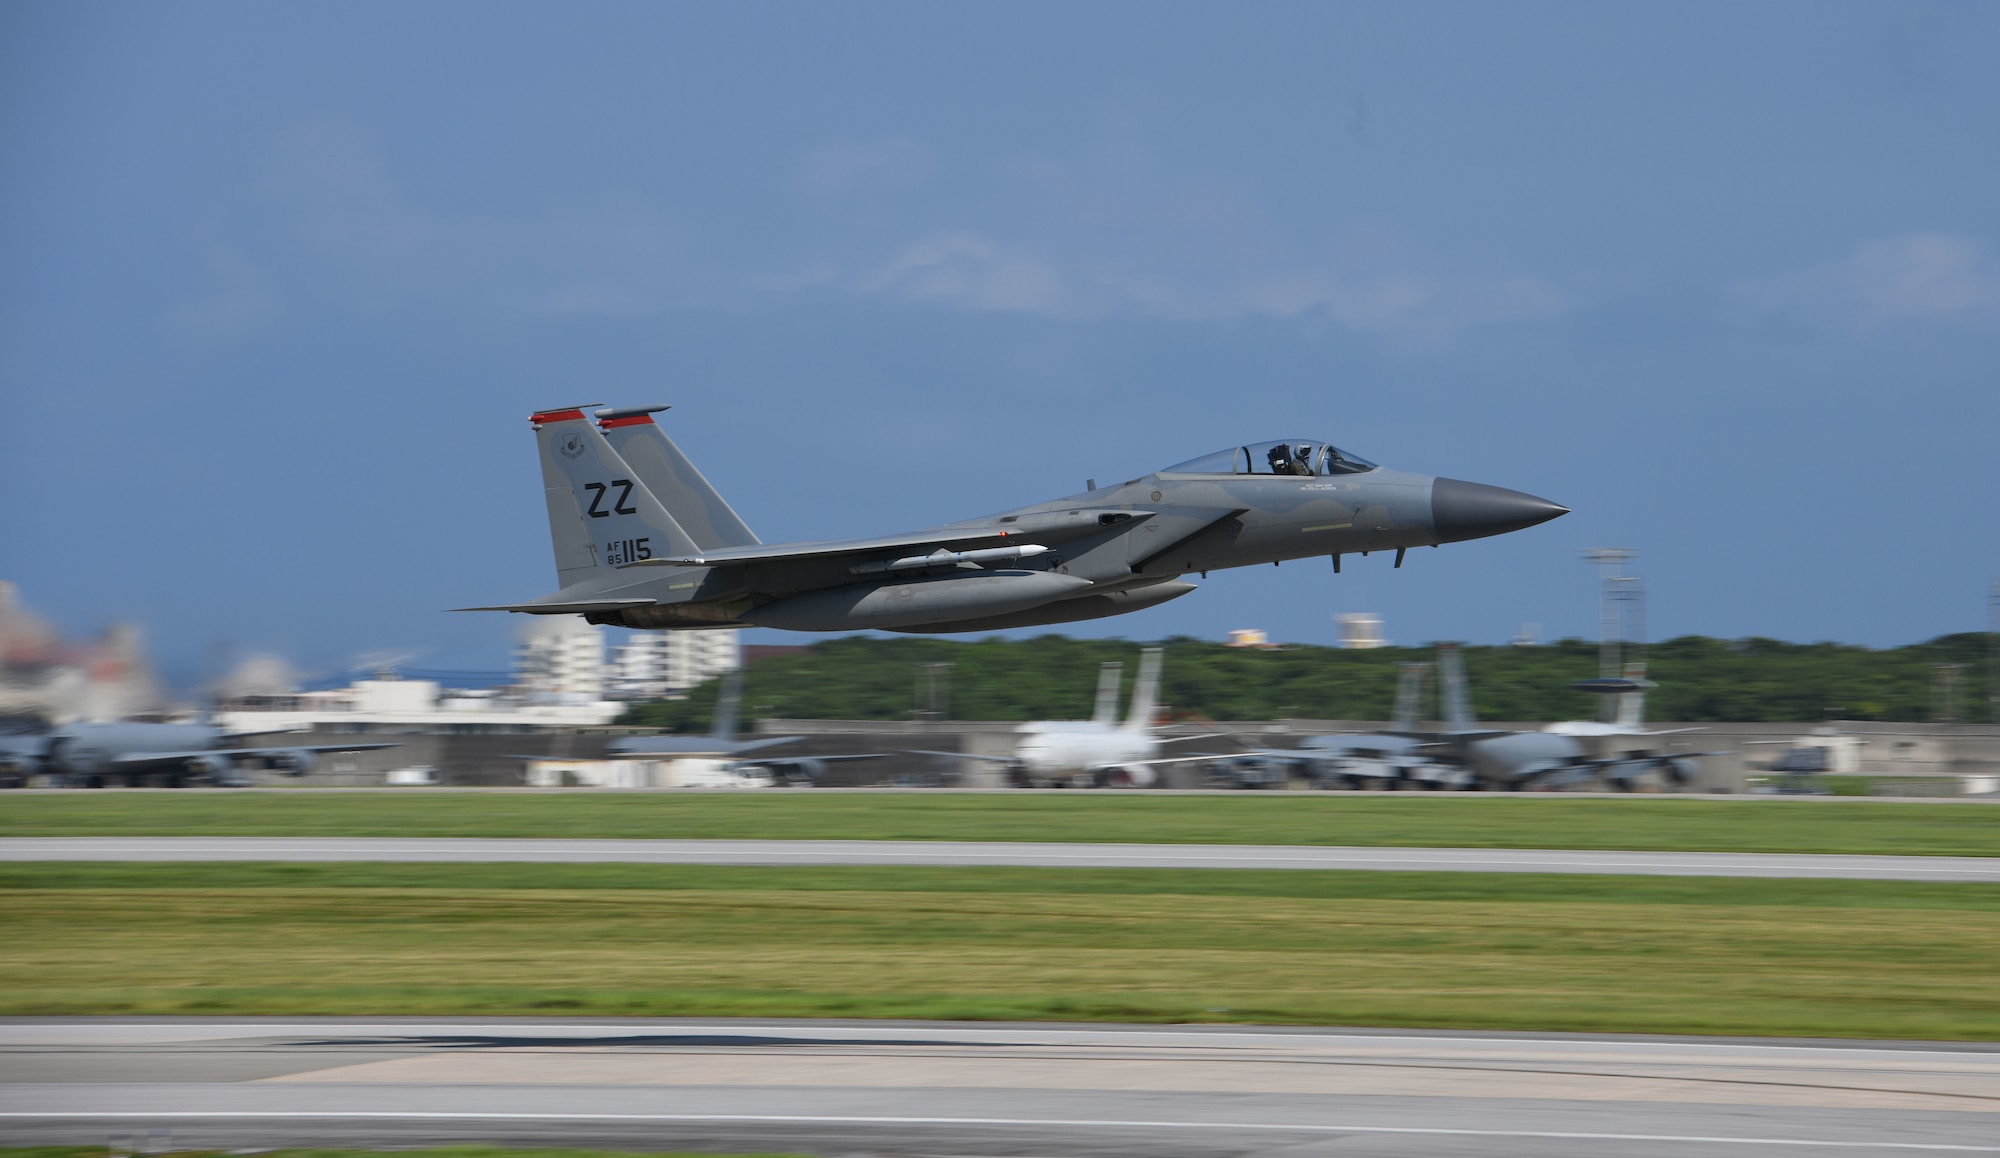 An F-15C Eagle assigned to the 67th Fighter Squadron takes off during Exercise WestPac Rumrunner, July 31, 2020, at Kadena Air Base, Japan. Team Kadena executed the second iteration of Rumrunner which is an 18th Wing-led exercise dedicated to implementing agile combat employment concepts to ensure readiness to protect and defend partners, allies and U.S. interests in the Indo-Pacific region.